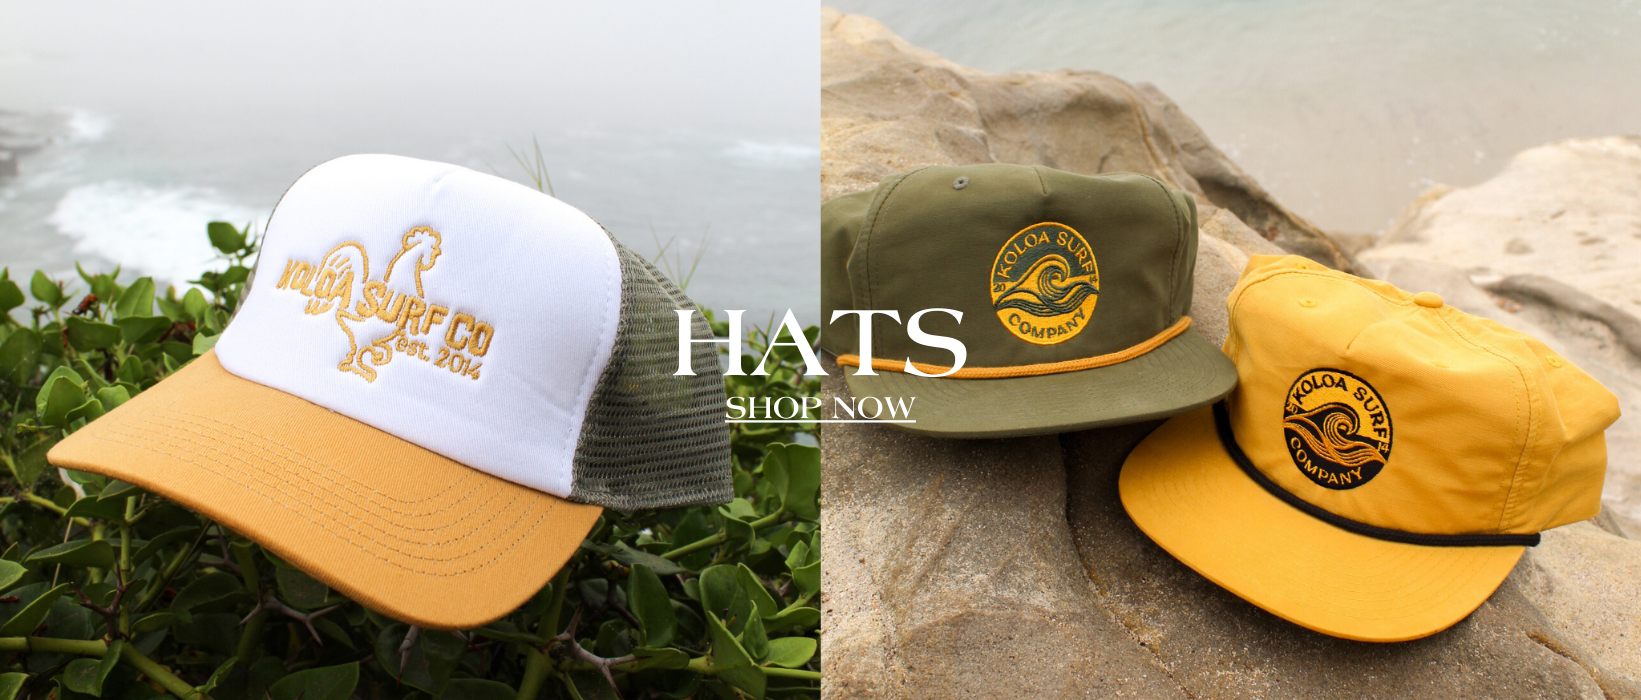 Koloa surf company surf hats! You have to check these durable mens hats now!